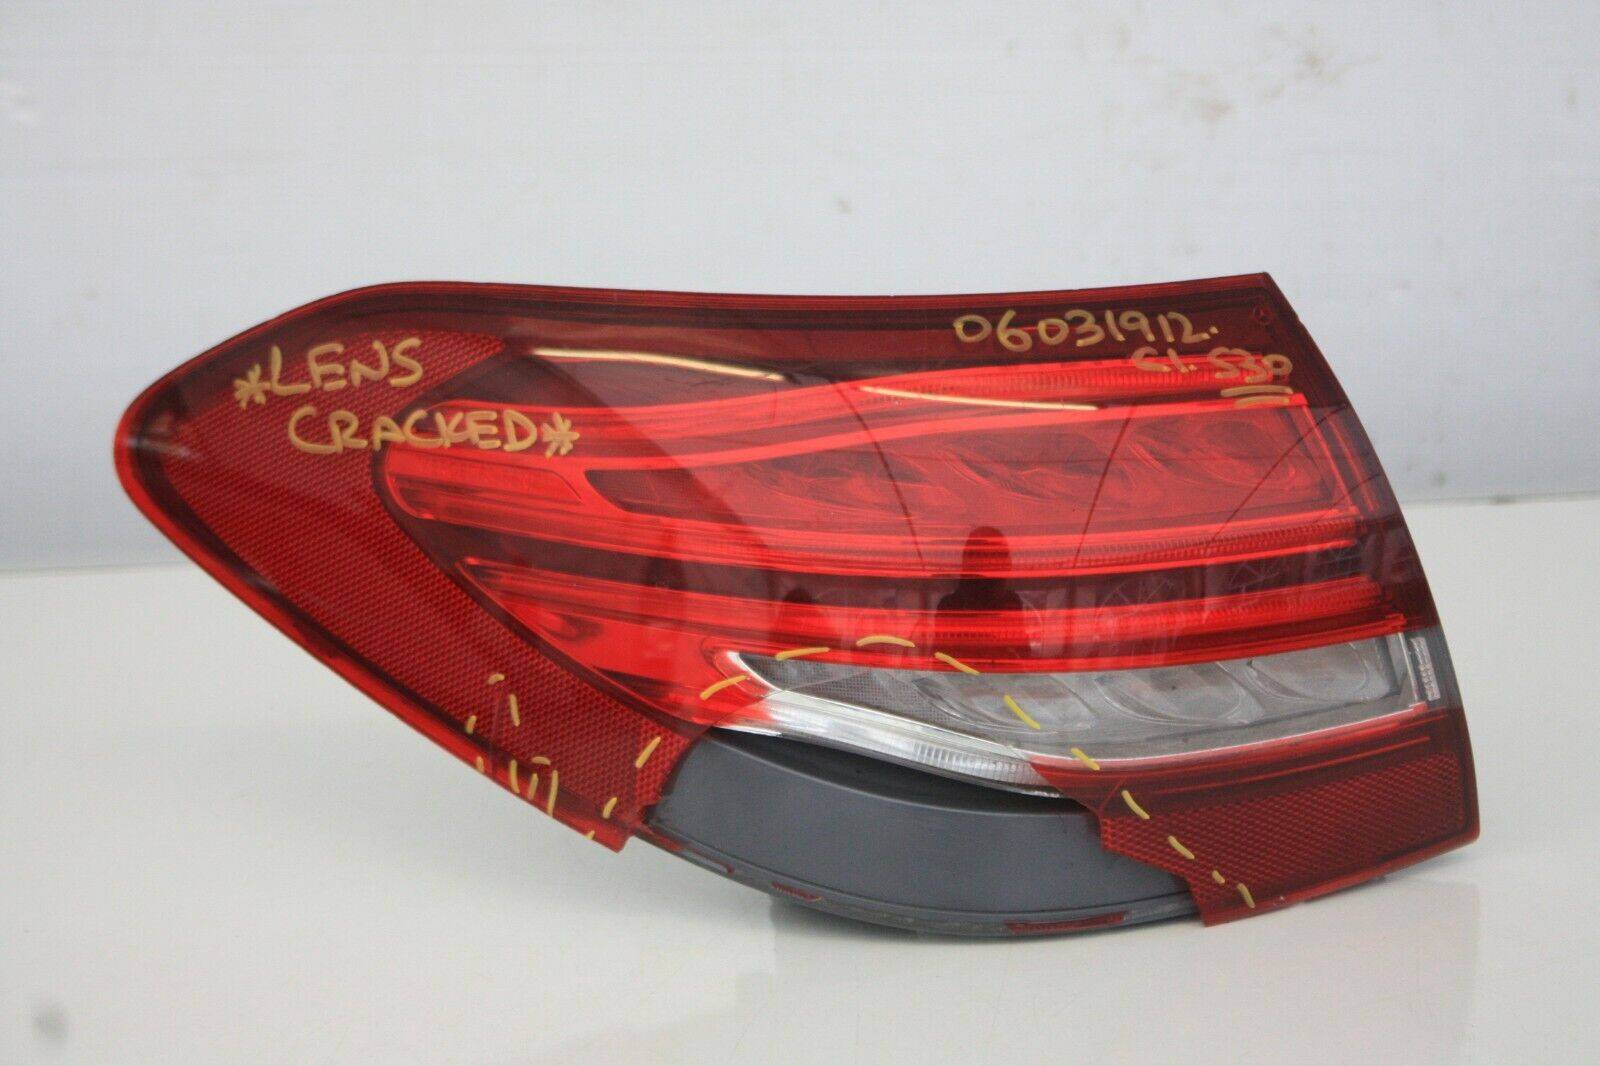 MERCEDES-C-CLASS-ESTATE-s205-LEFT-SIDE-TAIL-LIGHT-2014-TO-2018-damaged-175367517809